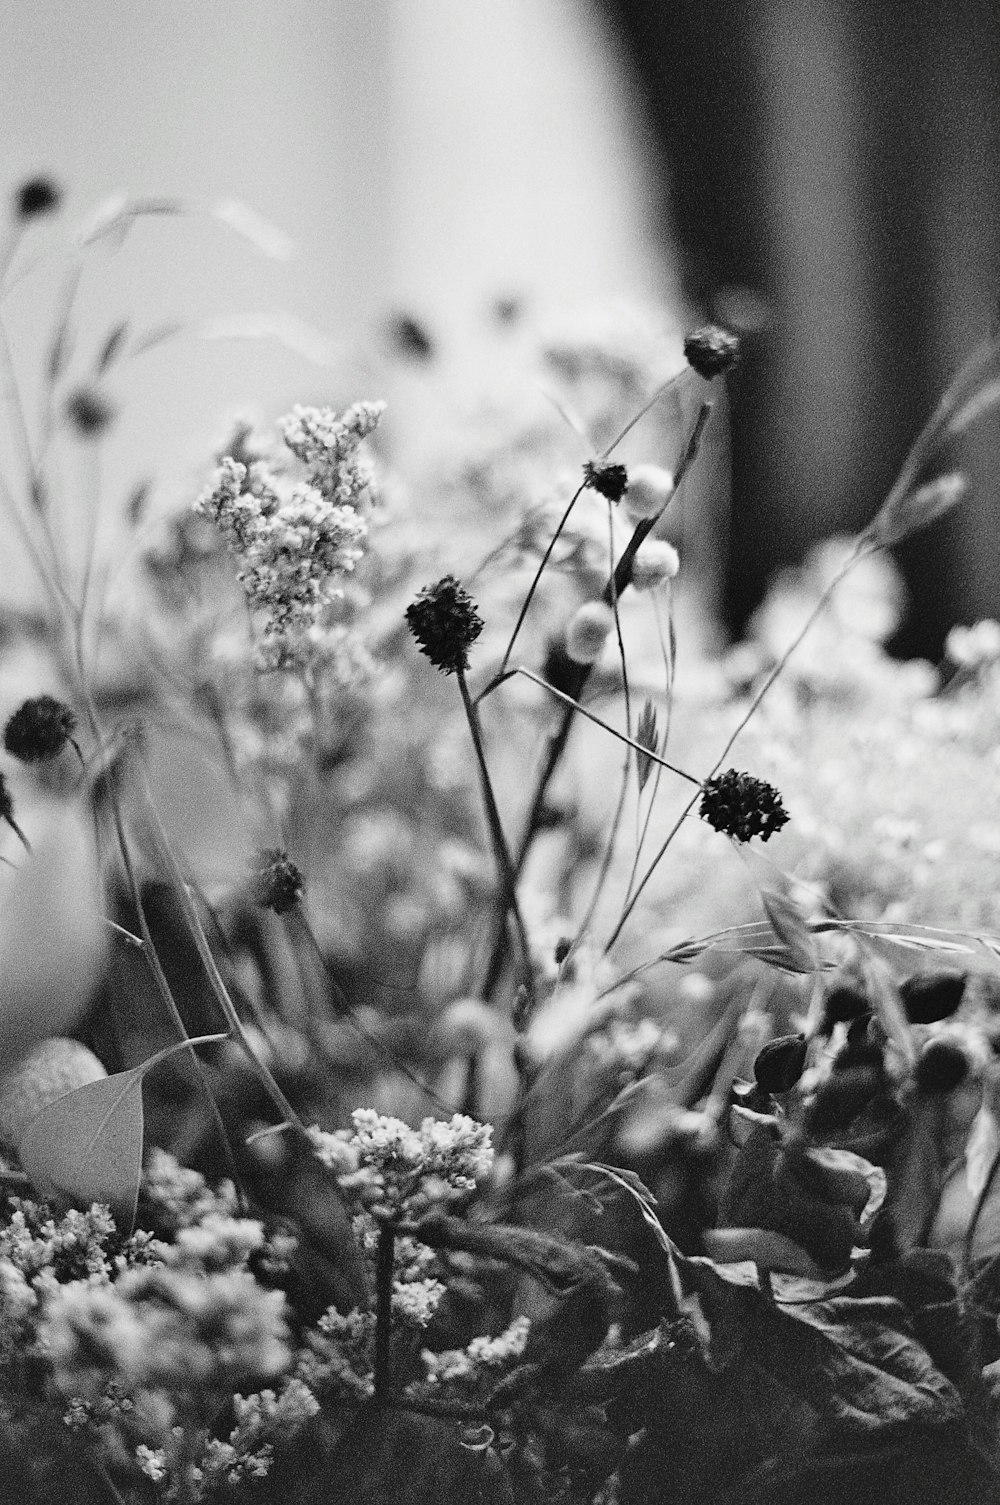 grayscale photography of blooming flowers